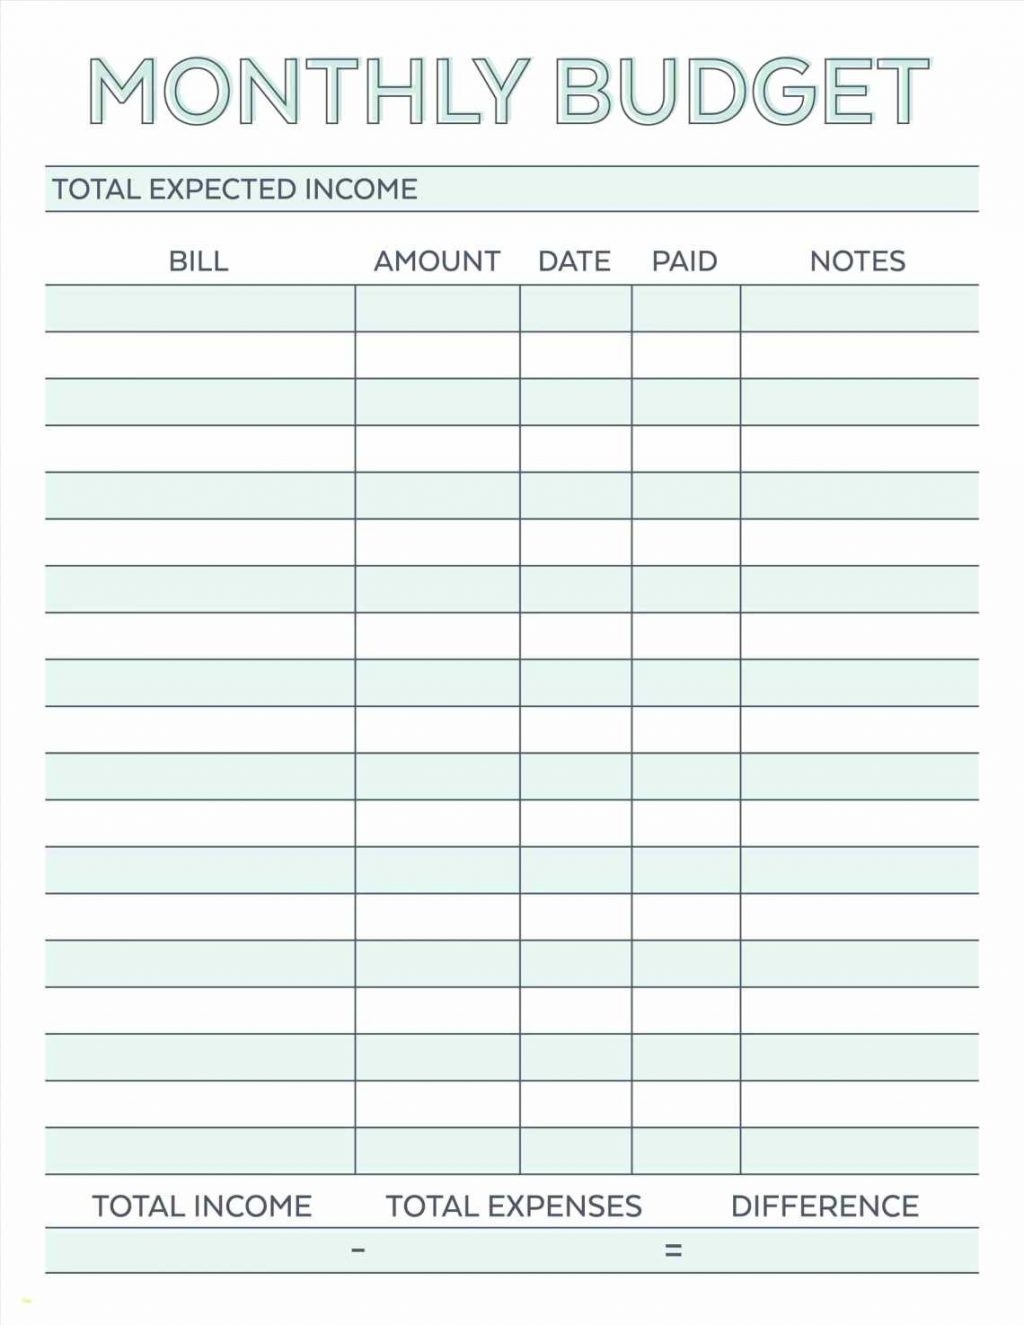 Weekly Bill Organizer Template Excel Monthly Download  Calendar For Bills Due Date